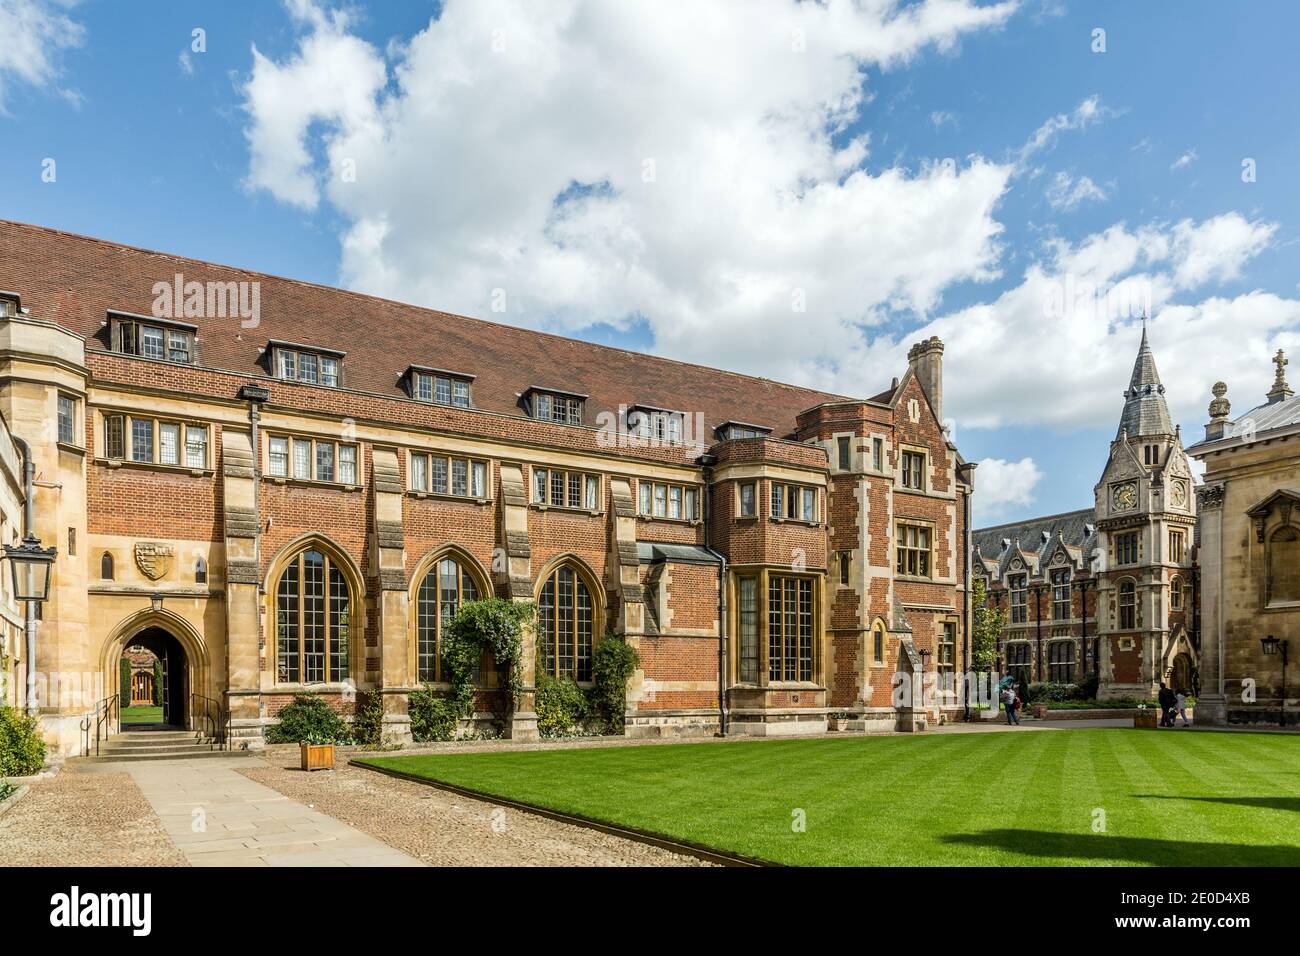 Courtyard and buildings of Pembroke College, part of the University of Cambridge, England, UK Stock Photo